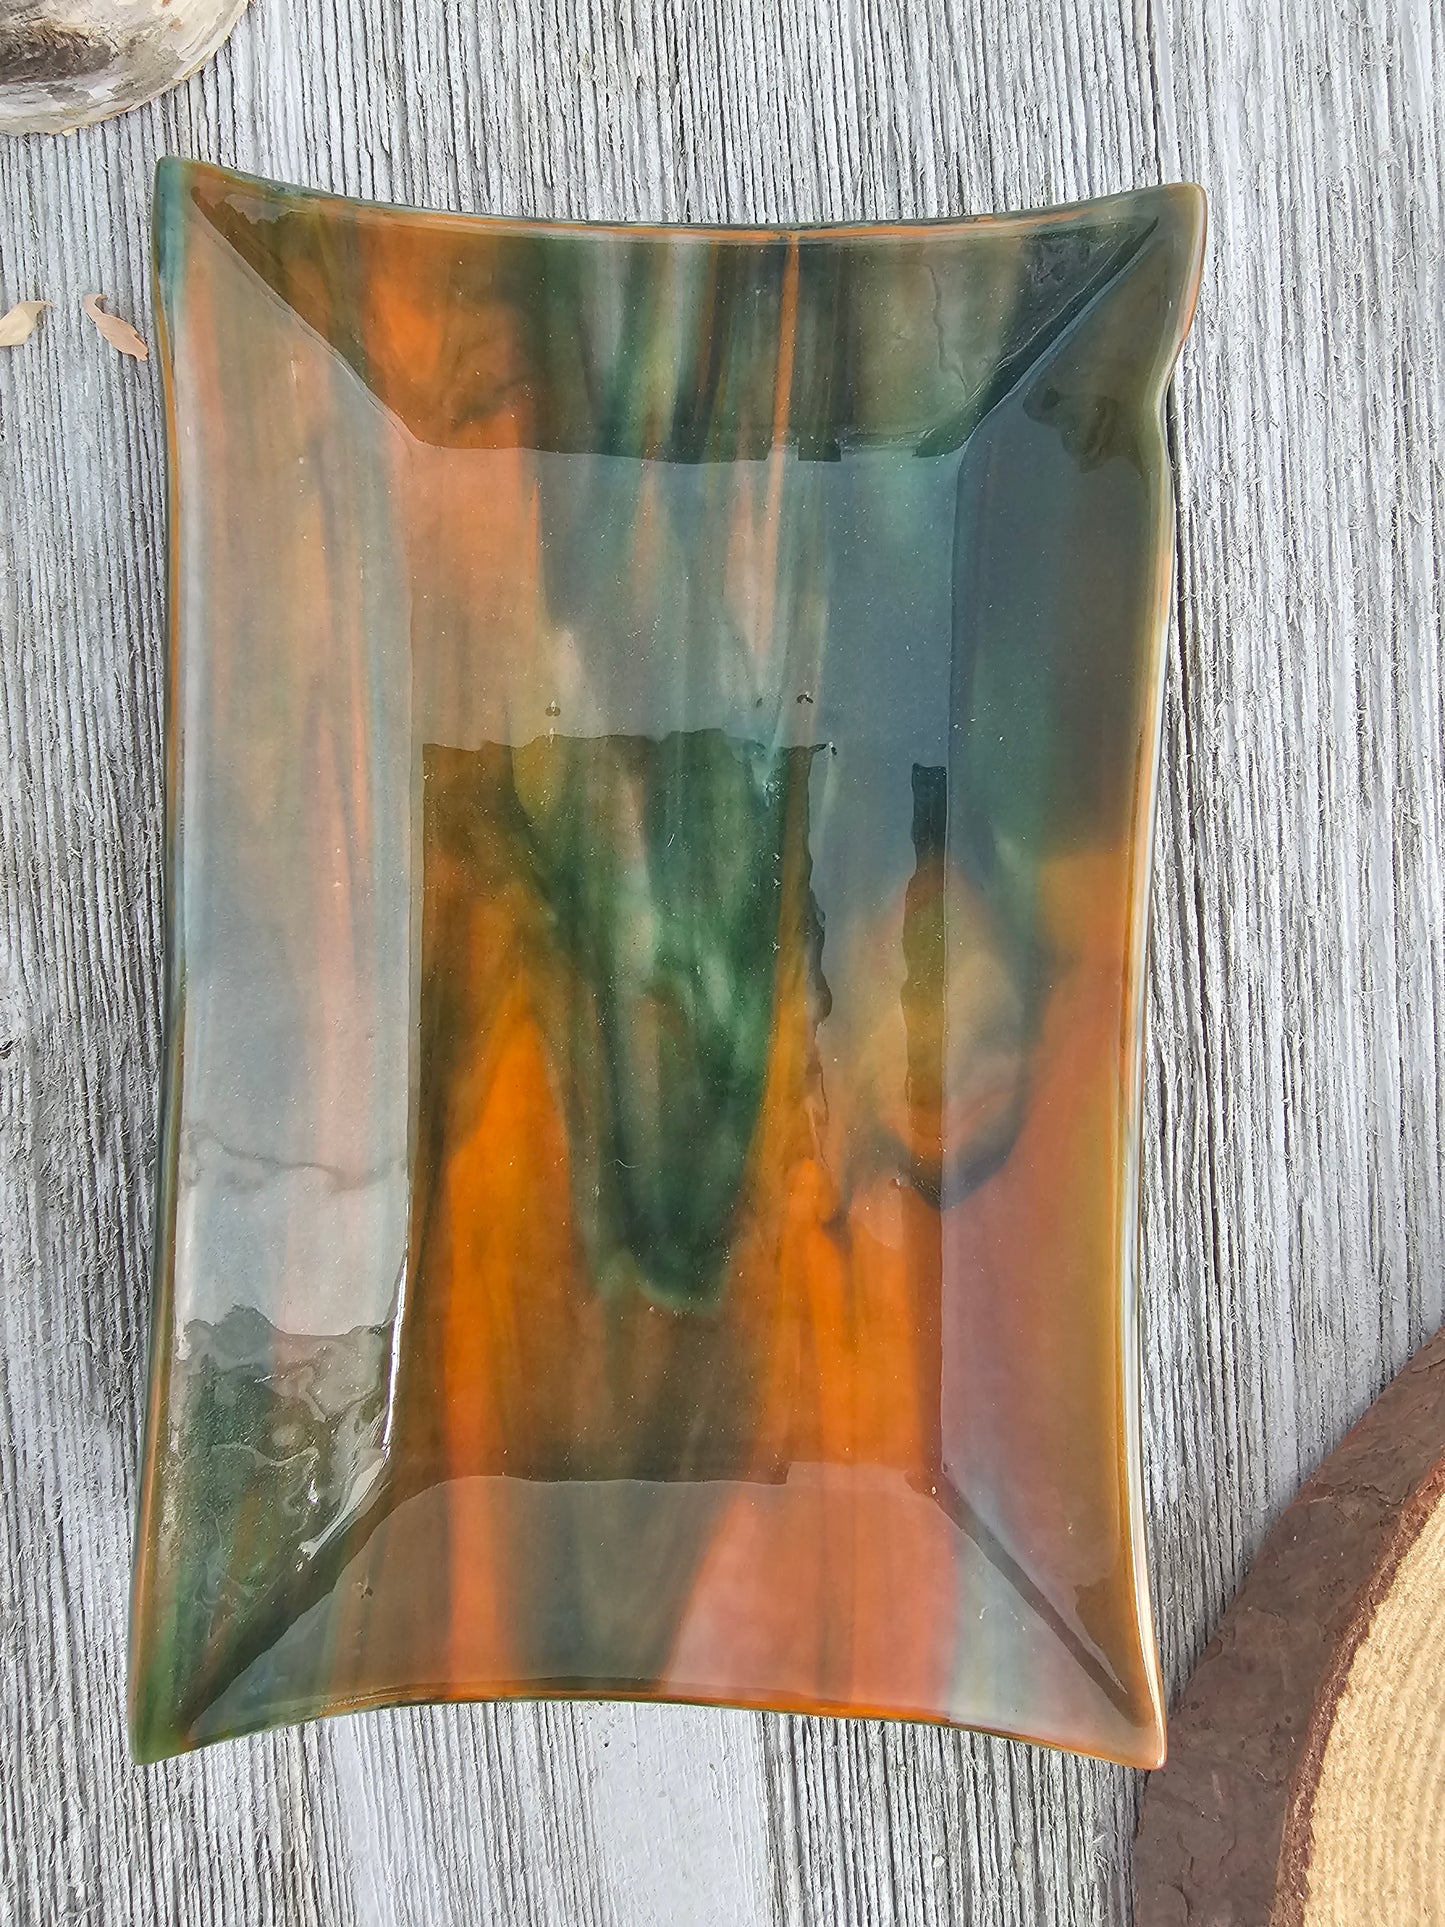 Fused Glass Dish, Orange and Green Streaky Glass, Soap Dish, Candle Holder, Ring Holder, Trinket Dish